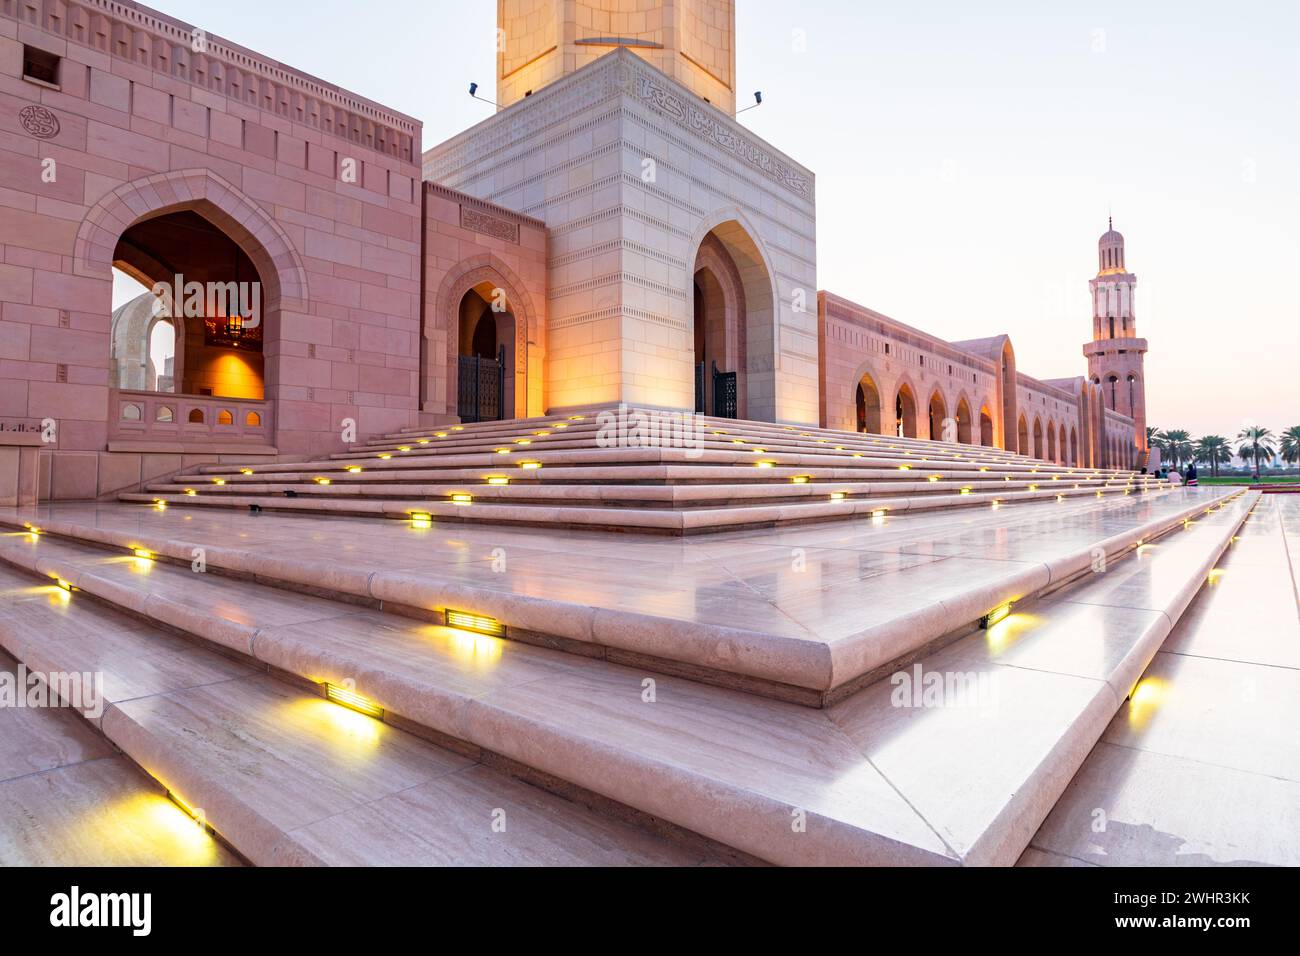 The Sultan Qaboos Grand Mosque low angle view with shiny steps in the foreground in the golden hour, Muscat, Oman Stock Photo